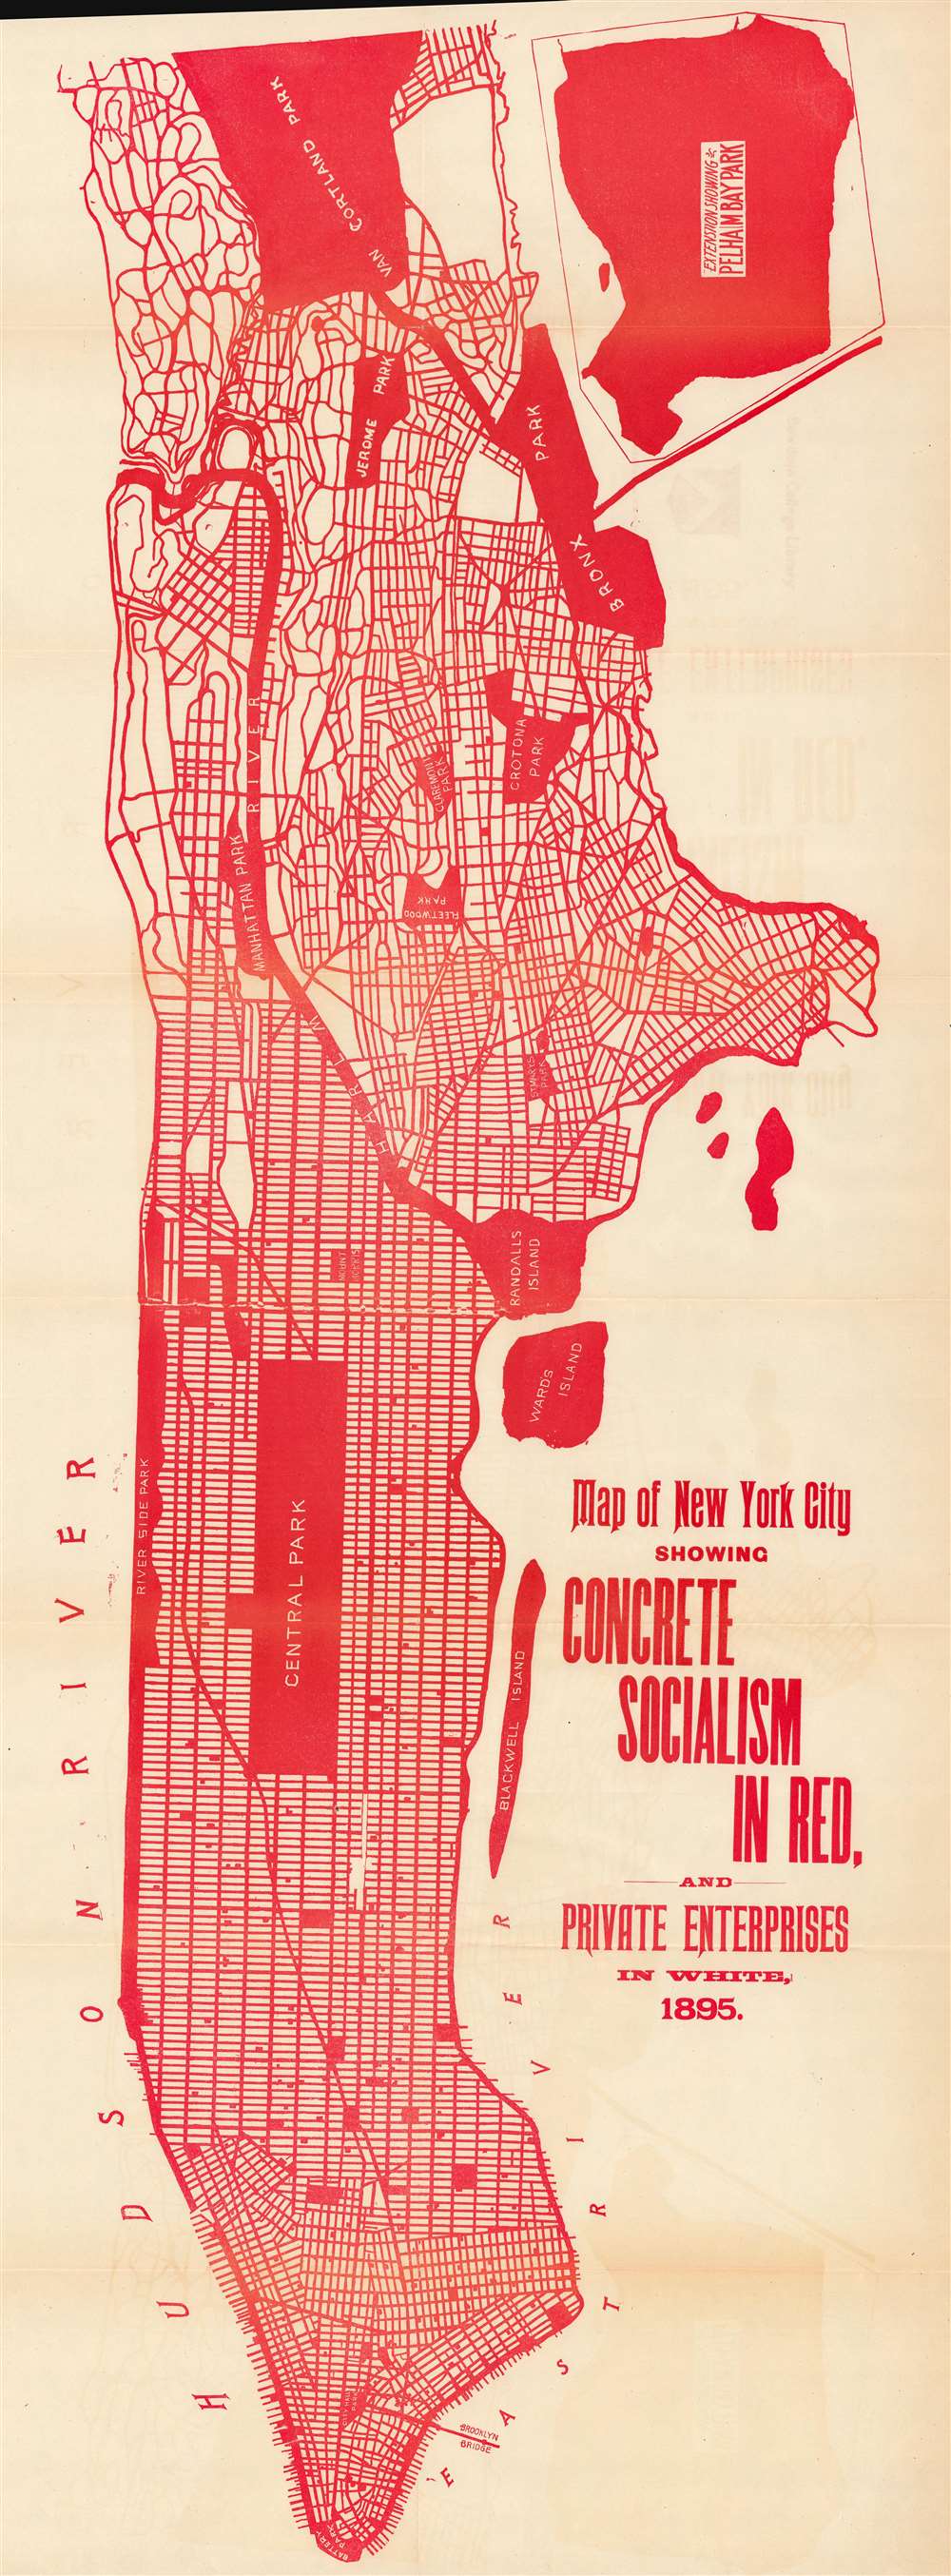 Map of New York City Showing Concrete Socialism in Red, and Private Enterprises in White, 1895. - Main View